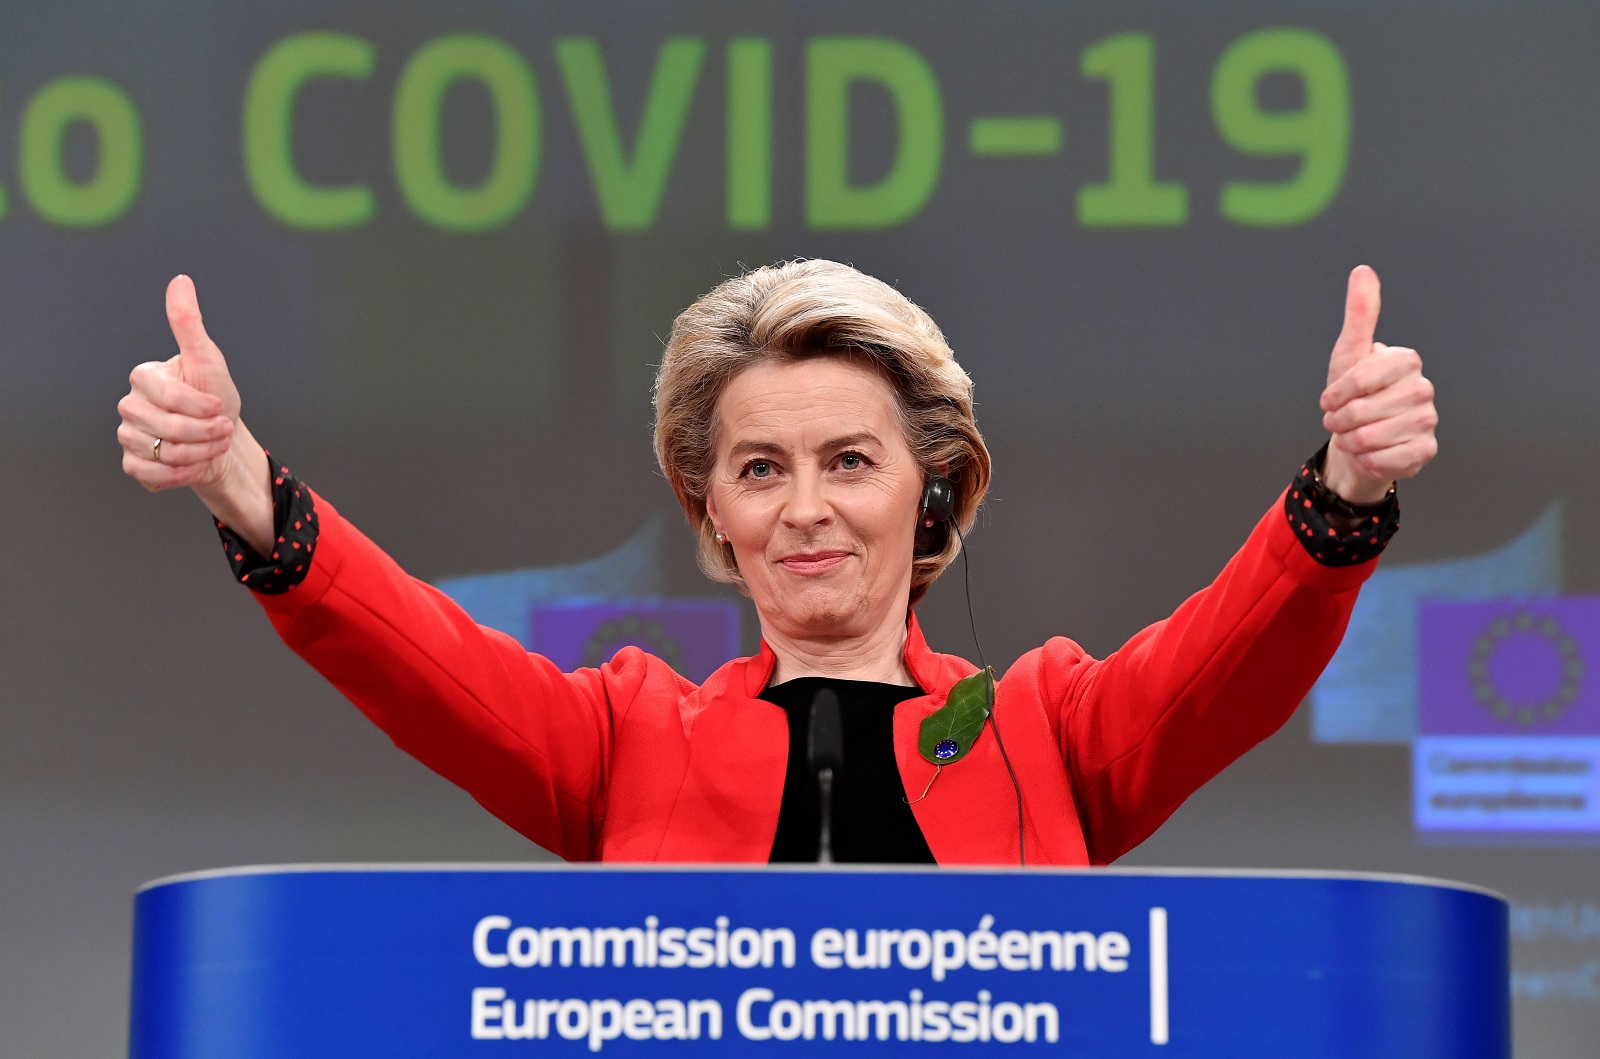 epa09079830 European Commission President Ursula von der Leyen poses with two thumbs up during a press conference following a college meeting to introduce draft legislation on a common EU Covid-19 vaccination certificate, in Brussels, Belgium, 17 March 2021. The European Commission announced the introduction of vaccination certificates, so-called 'Digital Green Certificate', for people vacinnated against Covid-19 in which the holder will provide informations on COVID-19 vaccination, recovery and test results by the end of summer. The certificate shall facilitate free travel within the EU under coronavirus pandemic restrictions.  EPA/JOHN THYS / POOL